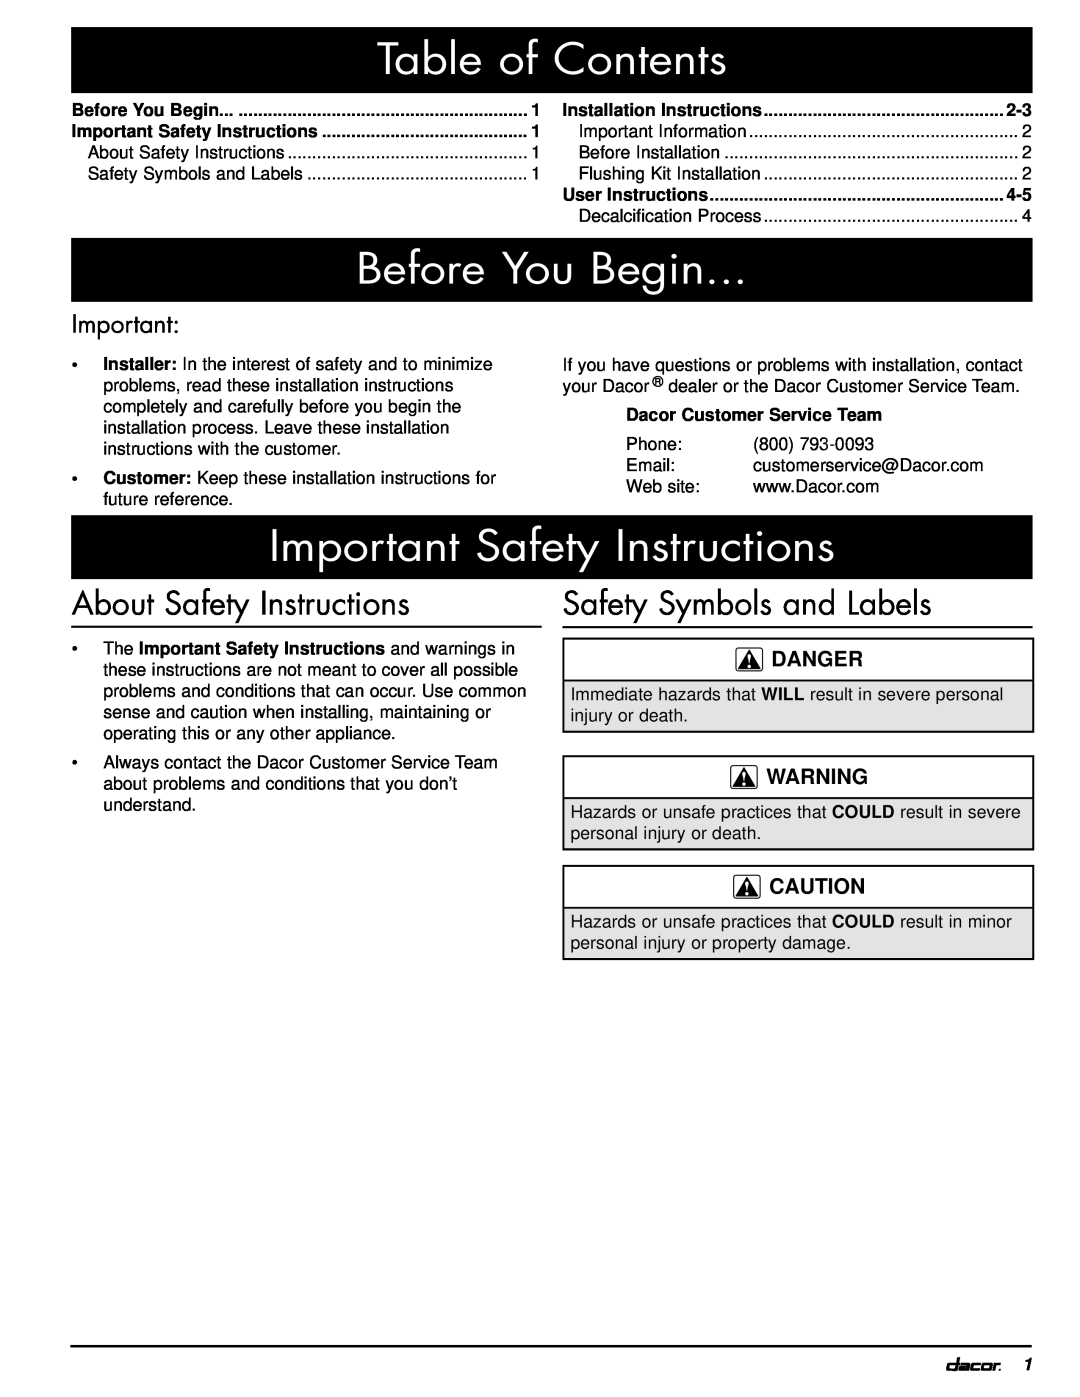 Dacor ACFS manual Table of Contents, Before You Begin, Important Safety Instructions, About Safety Instructions, Danger 